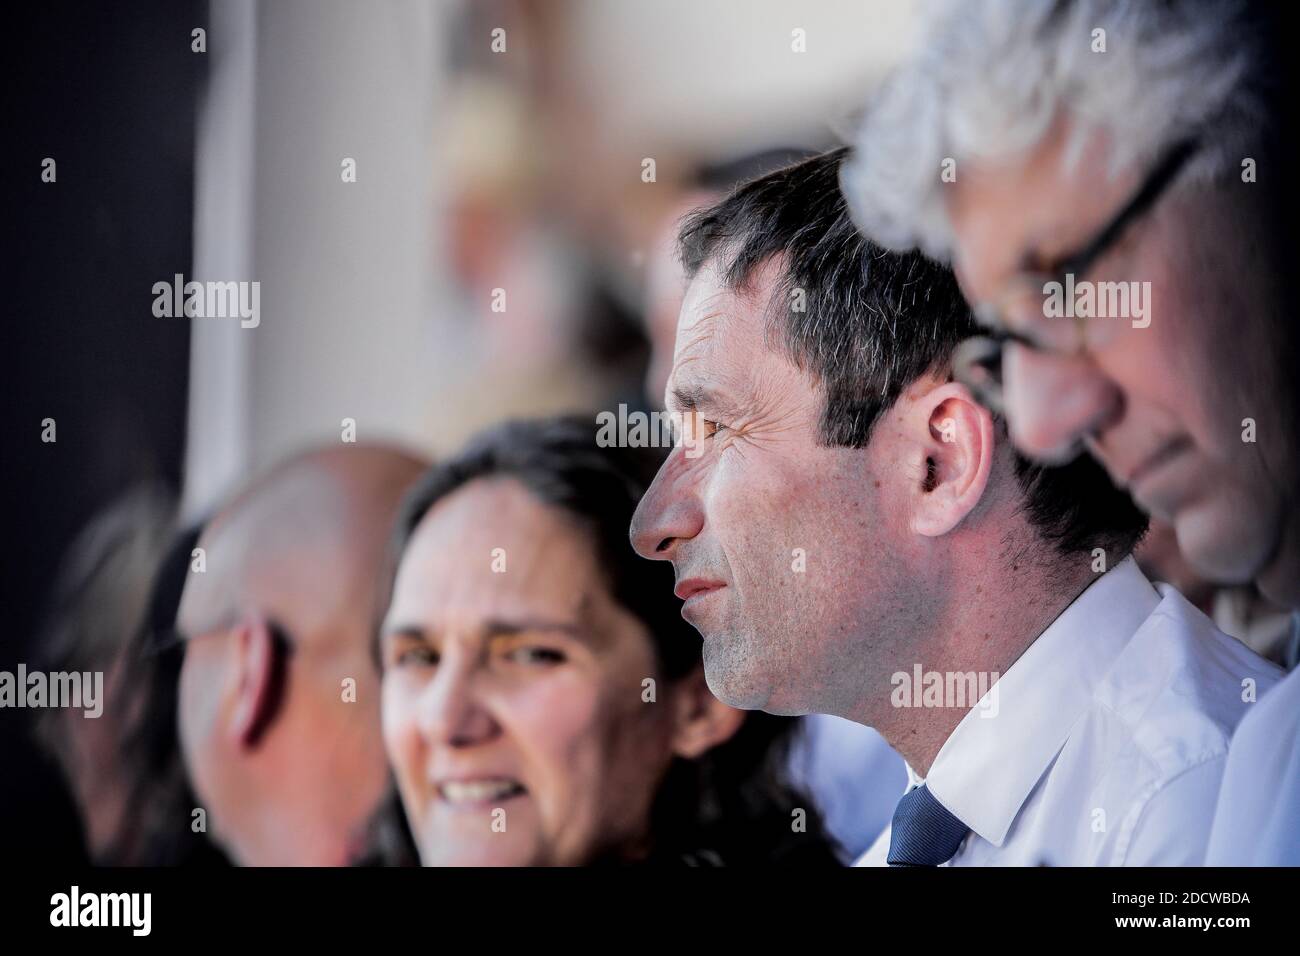 Benoit Hamon, candidate of the left-wing party 'Parti Socialiste' for presidential elections 2017 attends a Landaise race ( course landaise) in Aignan, France on April 17, 2017. Photo by Thibaud Moritz/ABACAPRESS.COM Stock Photo